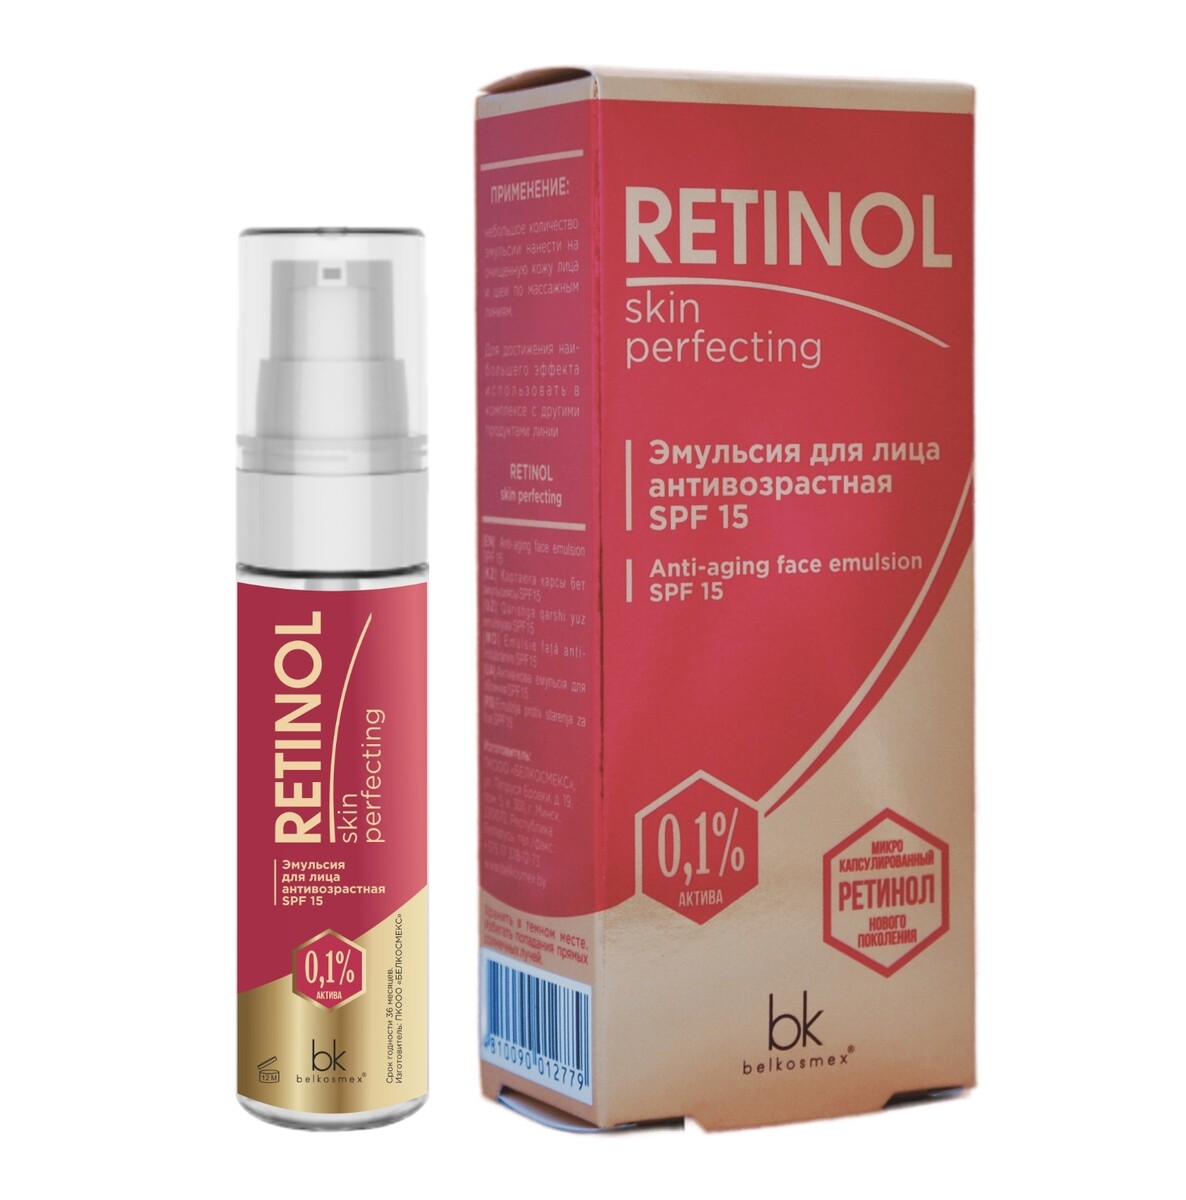 Retinol skin perfecting эмульсия для лица антивозрастная spf 15 30г silicone case uv resistant for arlo go camera protective cover skin security accessories